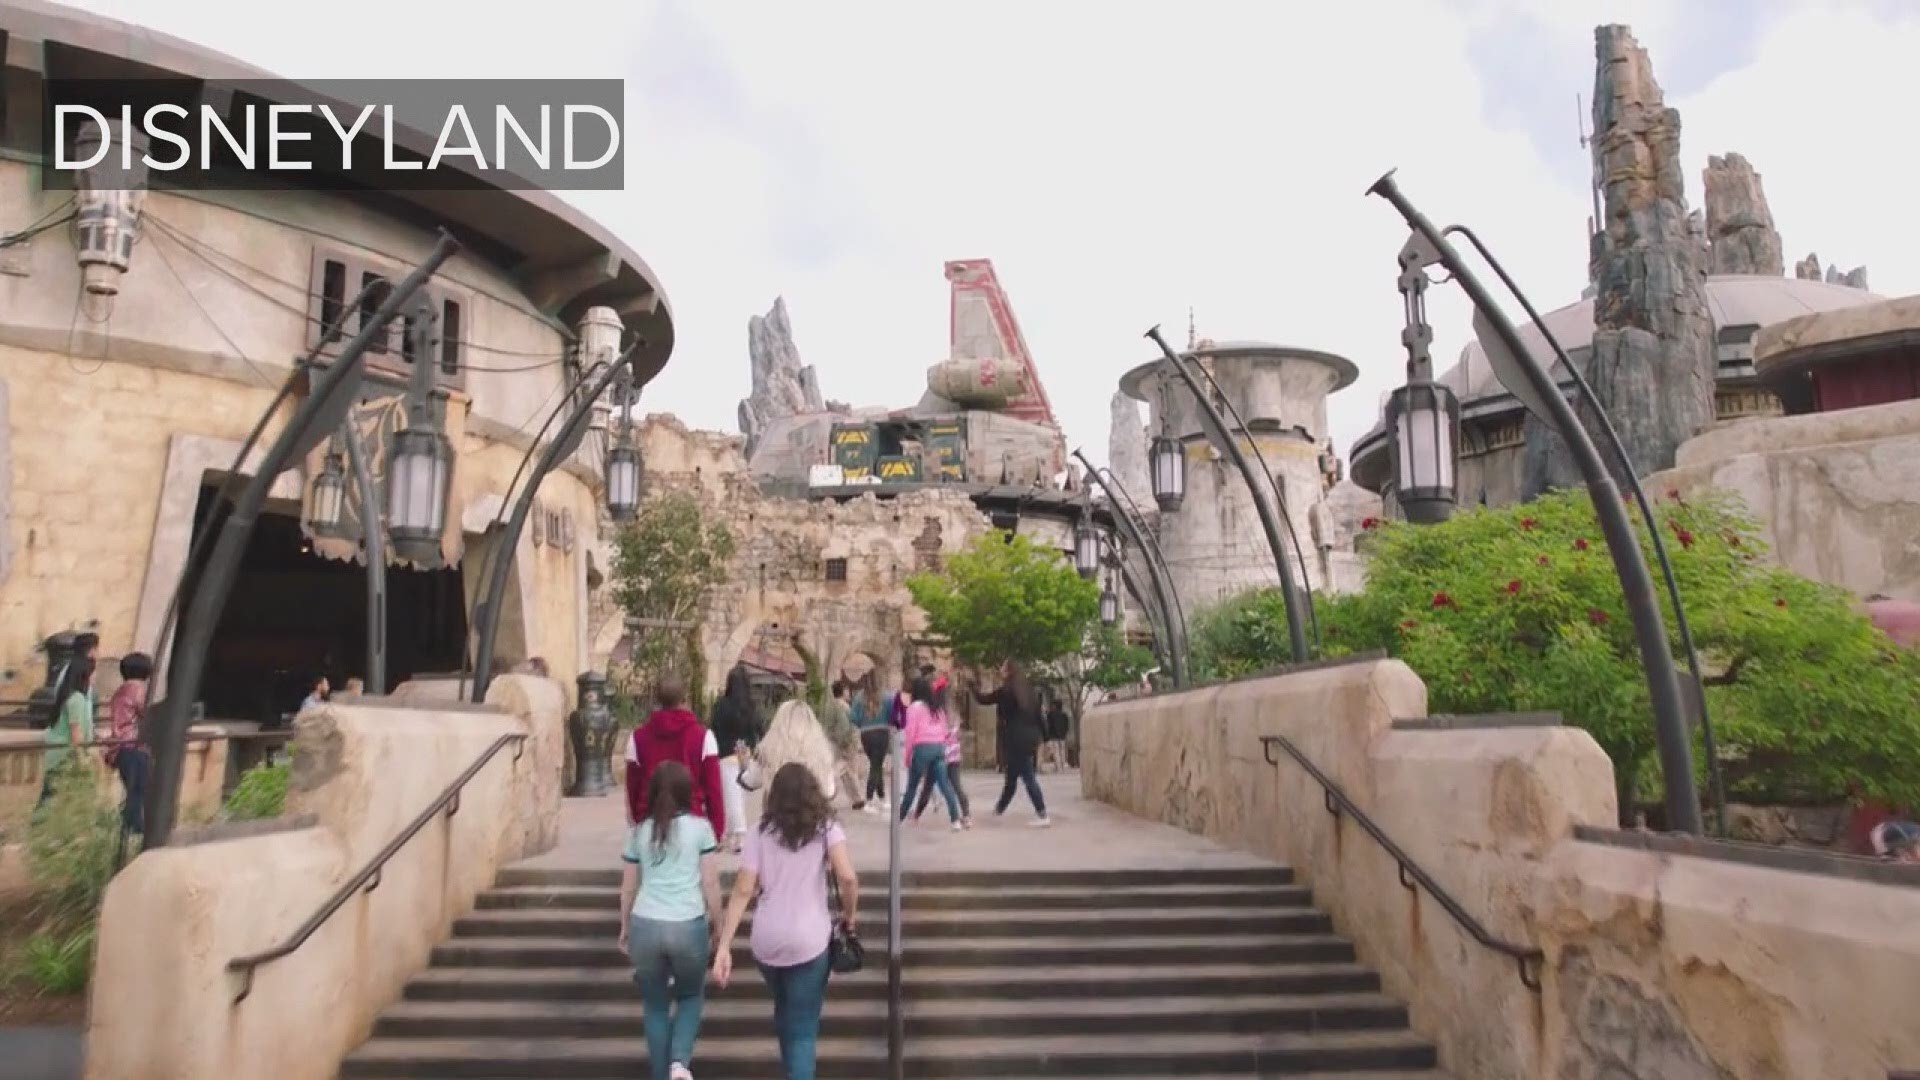 The theme park in California offered media members a glimpse into Star Wars: Galaxy's Edge on Wednesday. https://on.wtsp.com/2wuvQM2